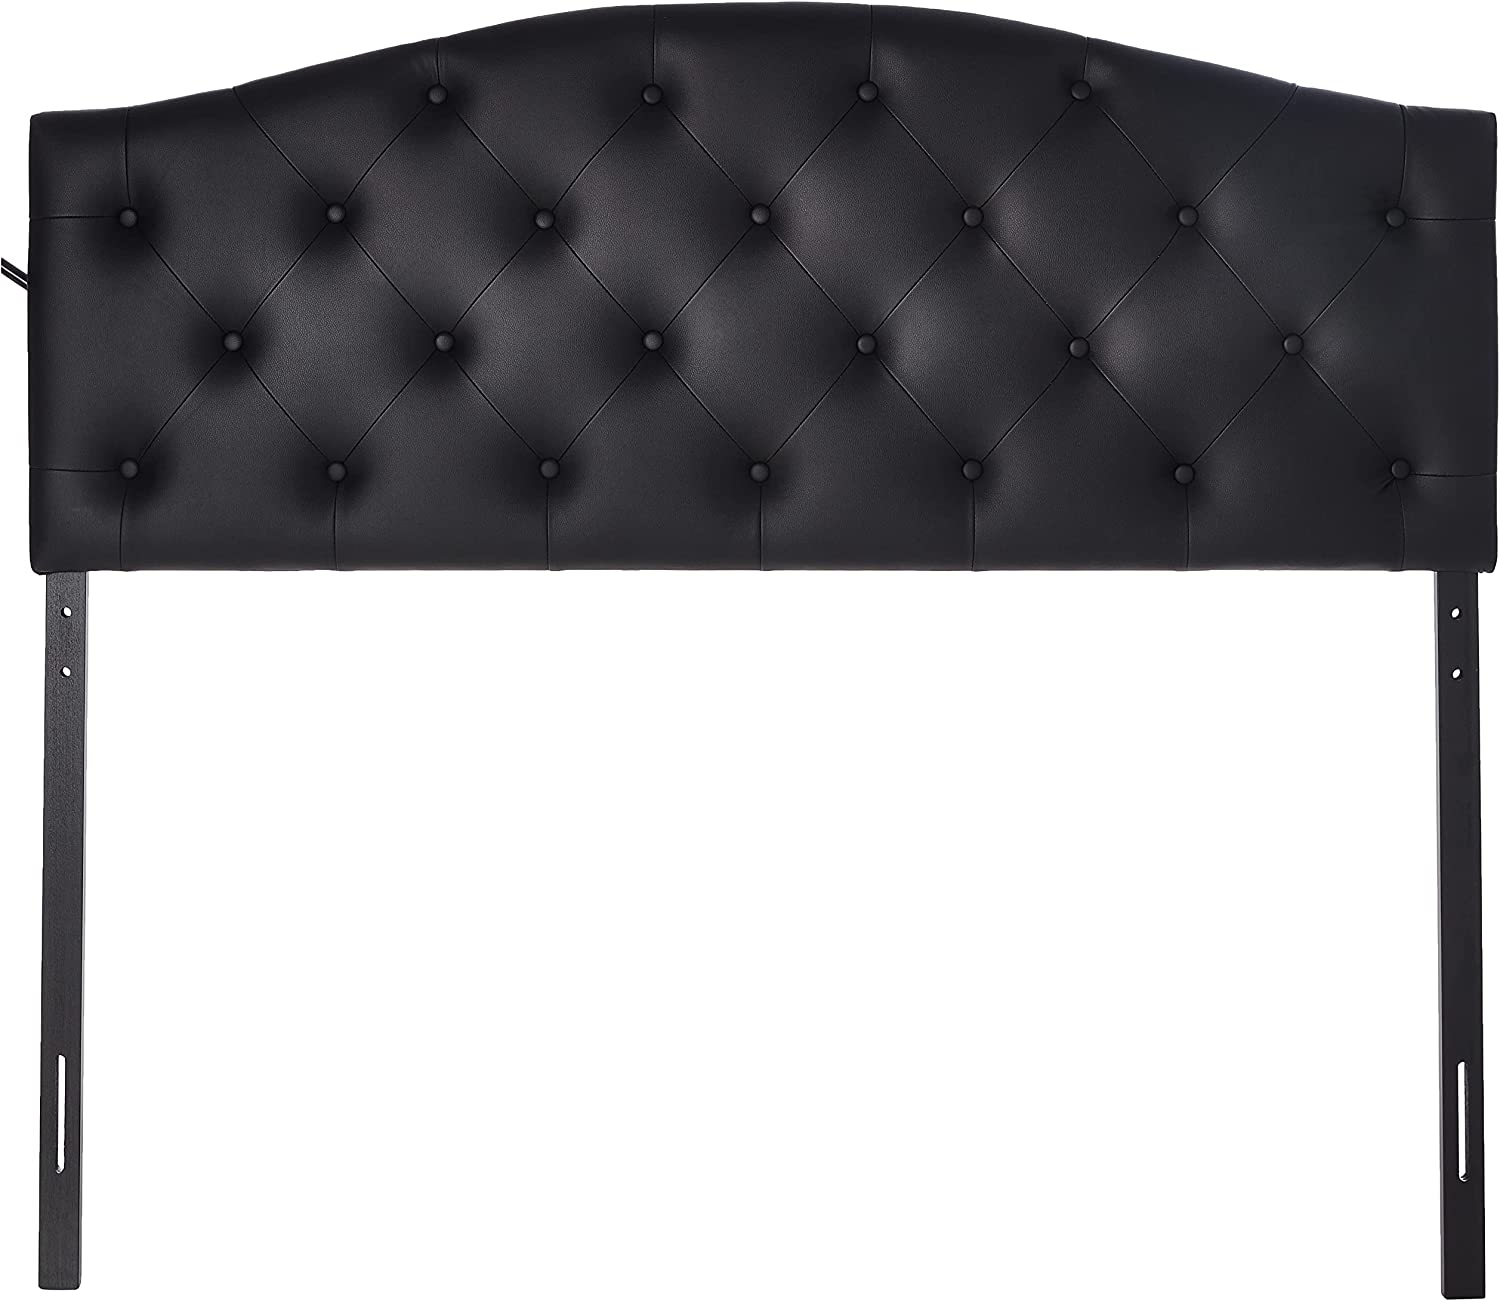 Add an accent of interest to your bedroom style with the Myra Upholstered Headboard. The headboard is fully upholstered in faux leather for easy maintenance and every days use. Scalloped headboard frame with button-tufting design for a classic look while